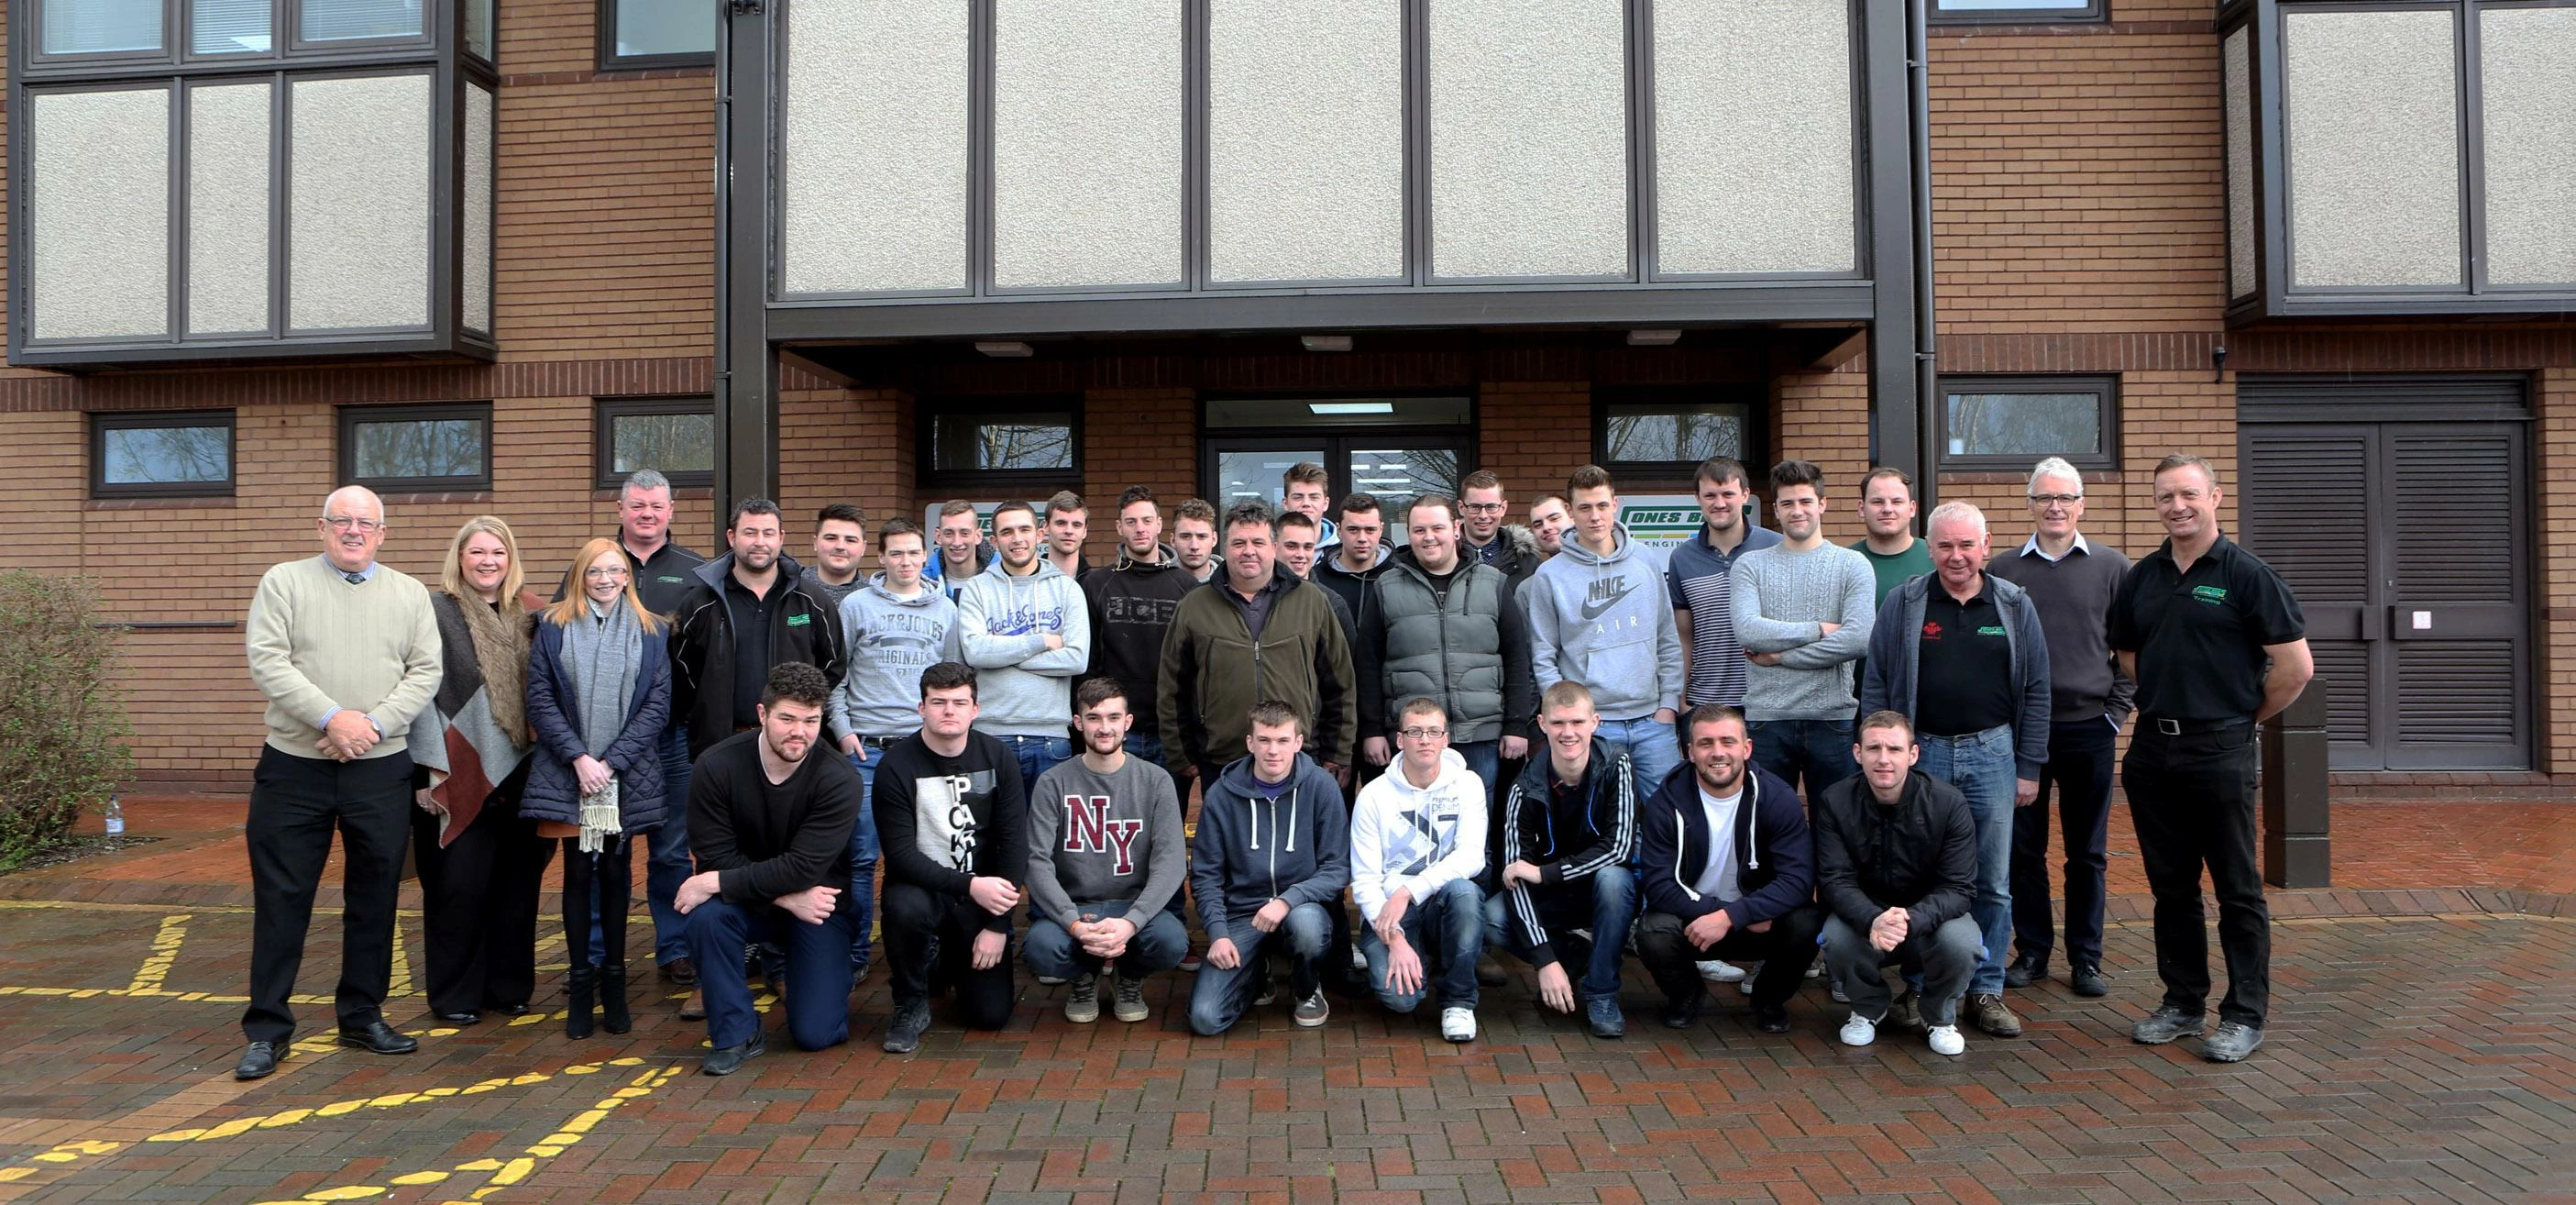 Jones Bros’ current crop of apprentices with staff from the training department.